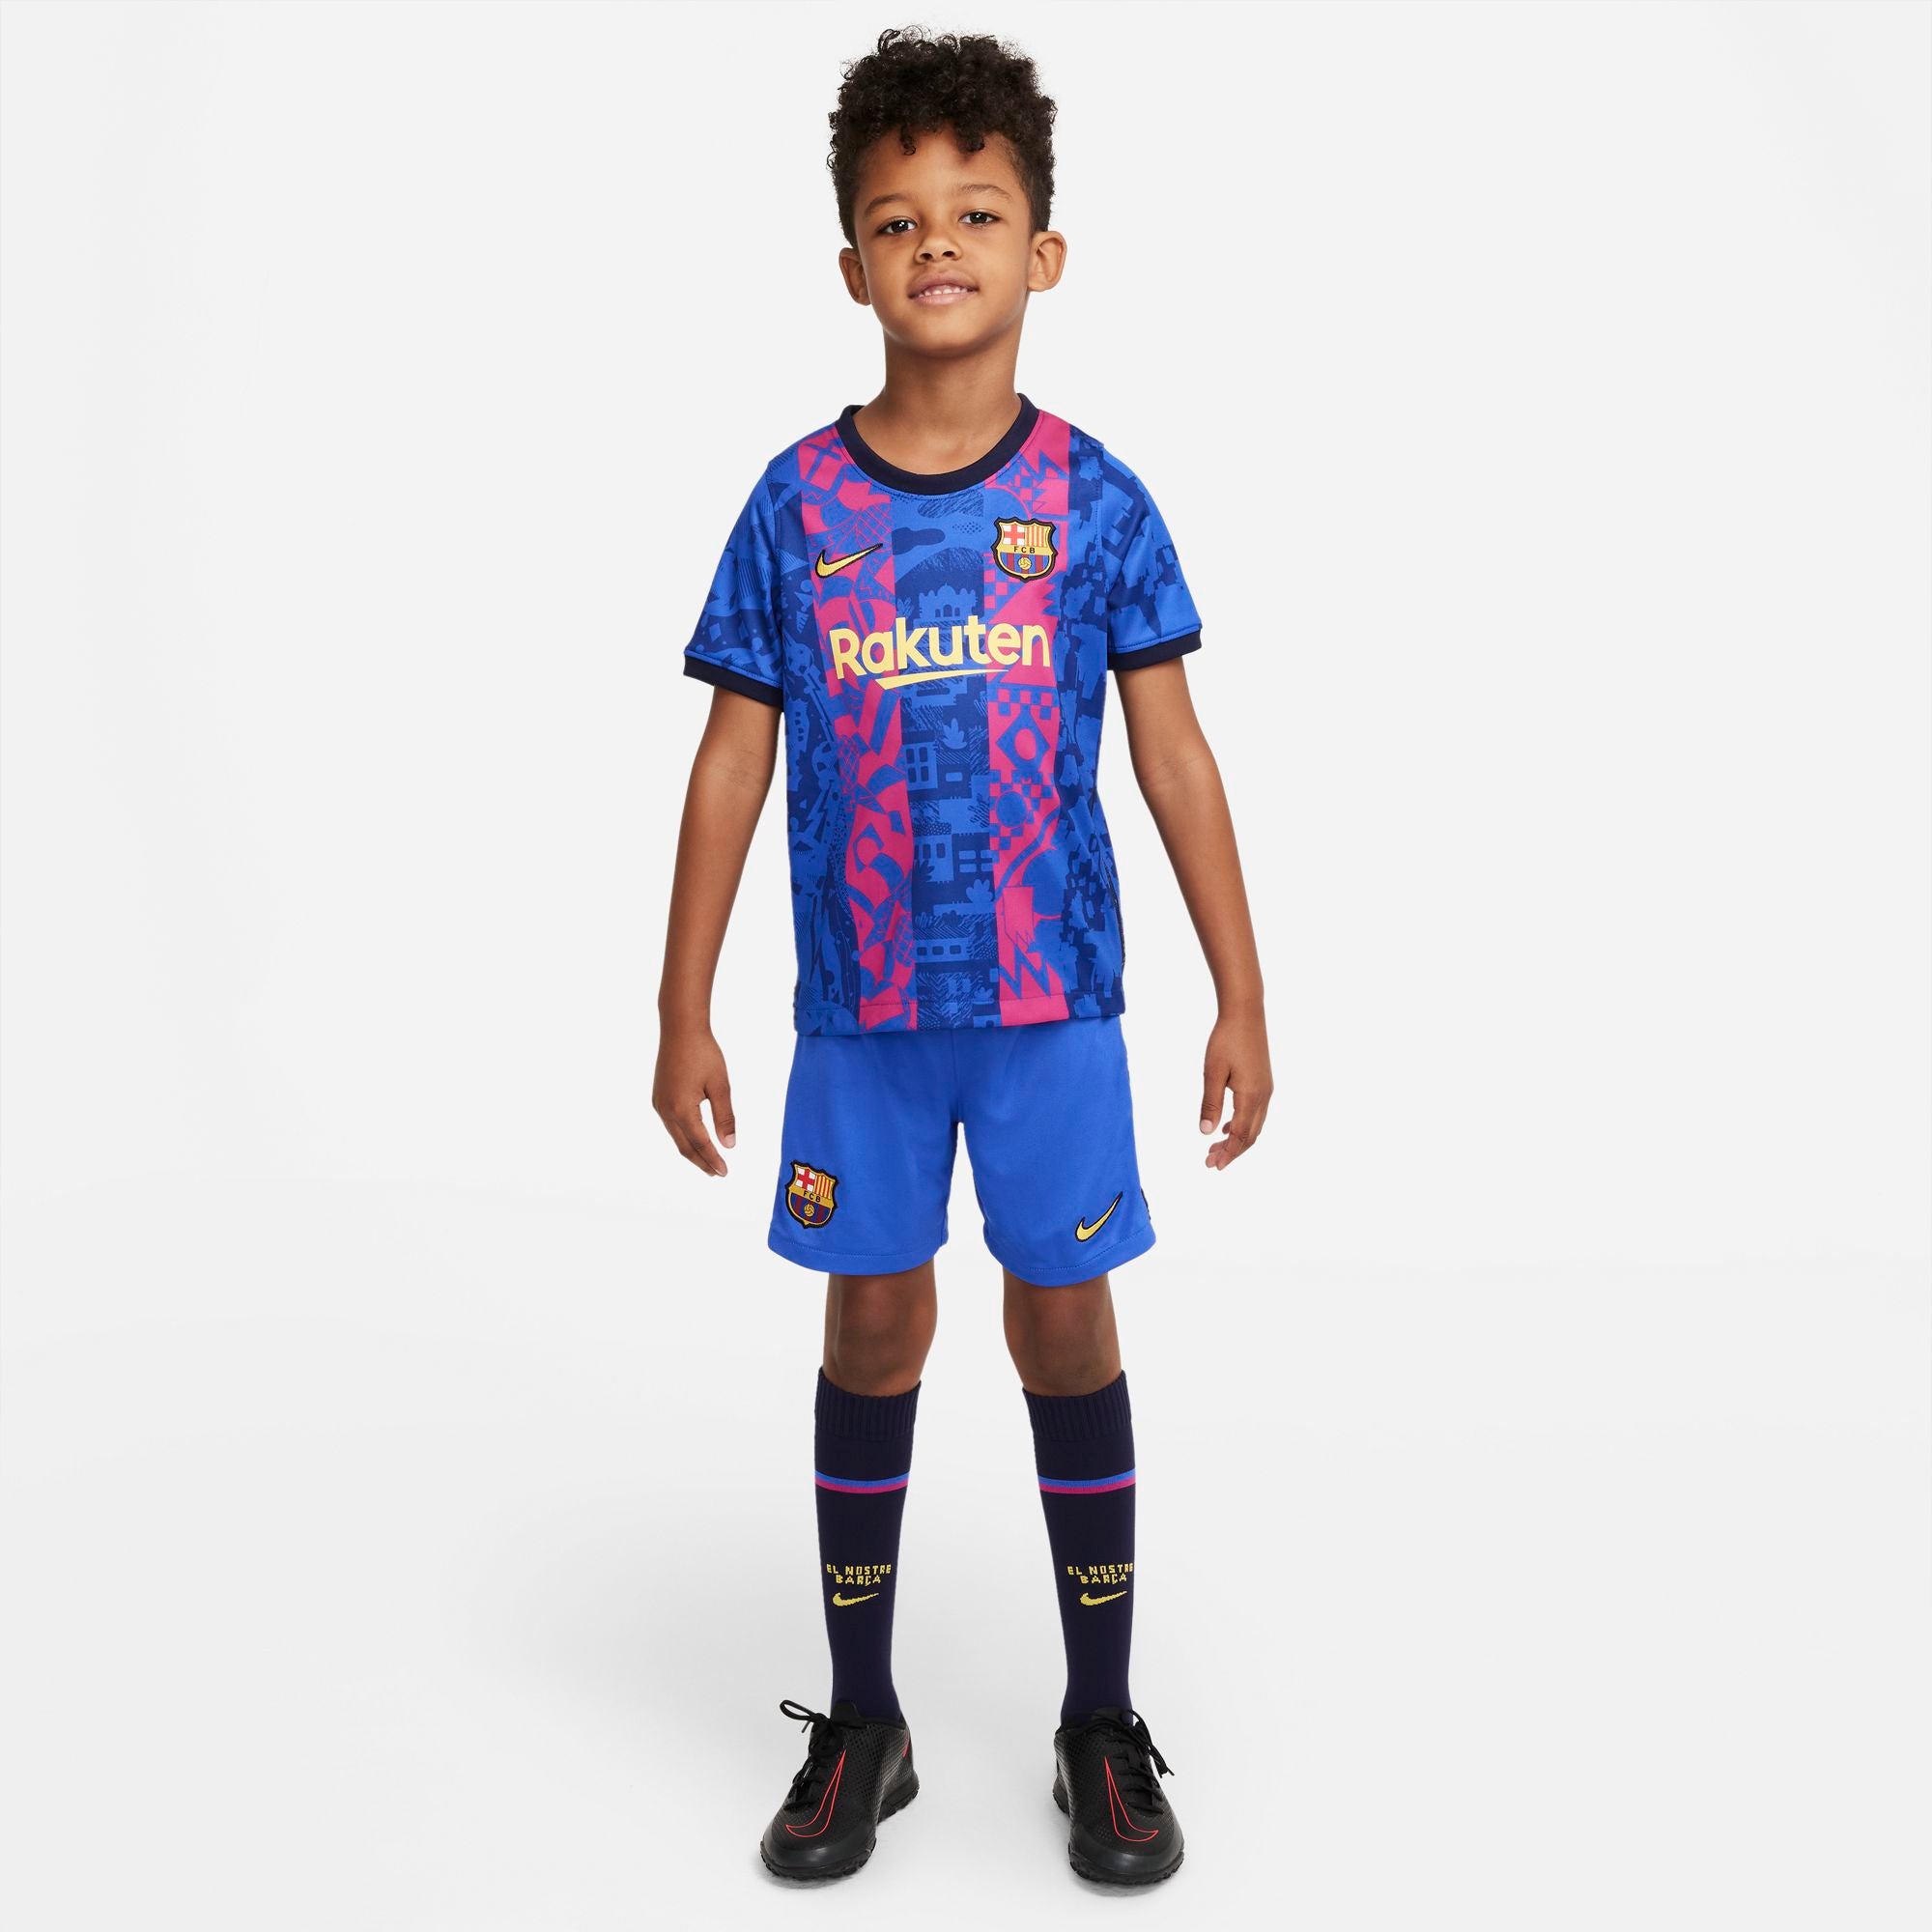 Looking for Kids soccer jersey kits,other kids items and this